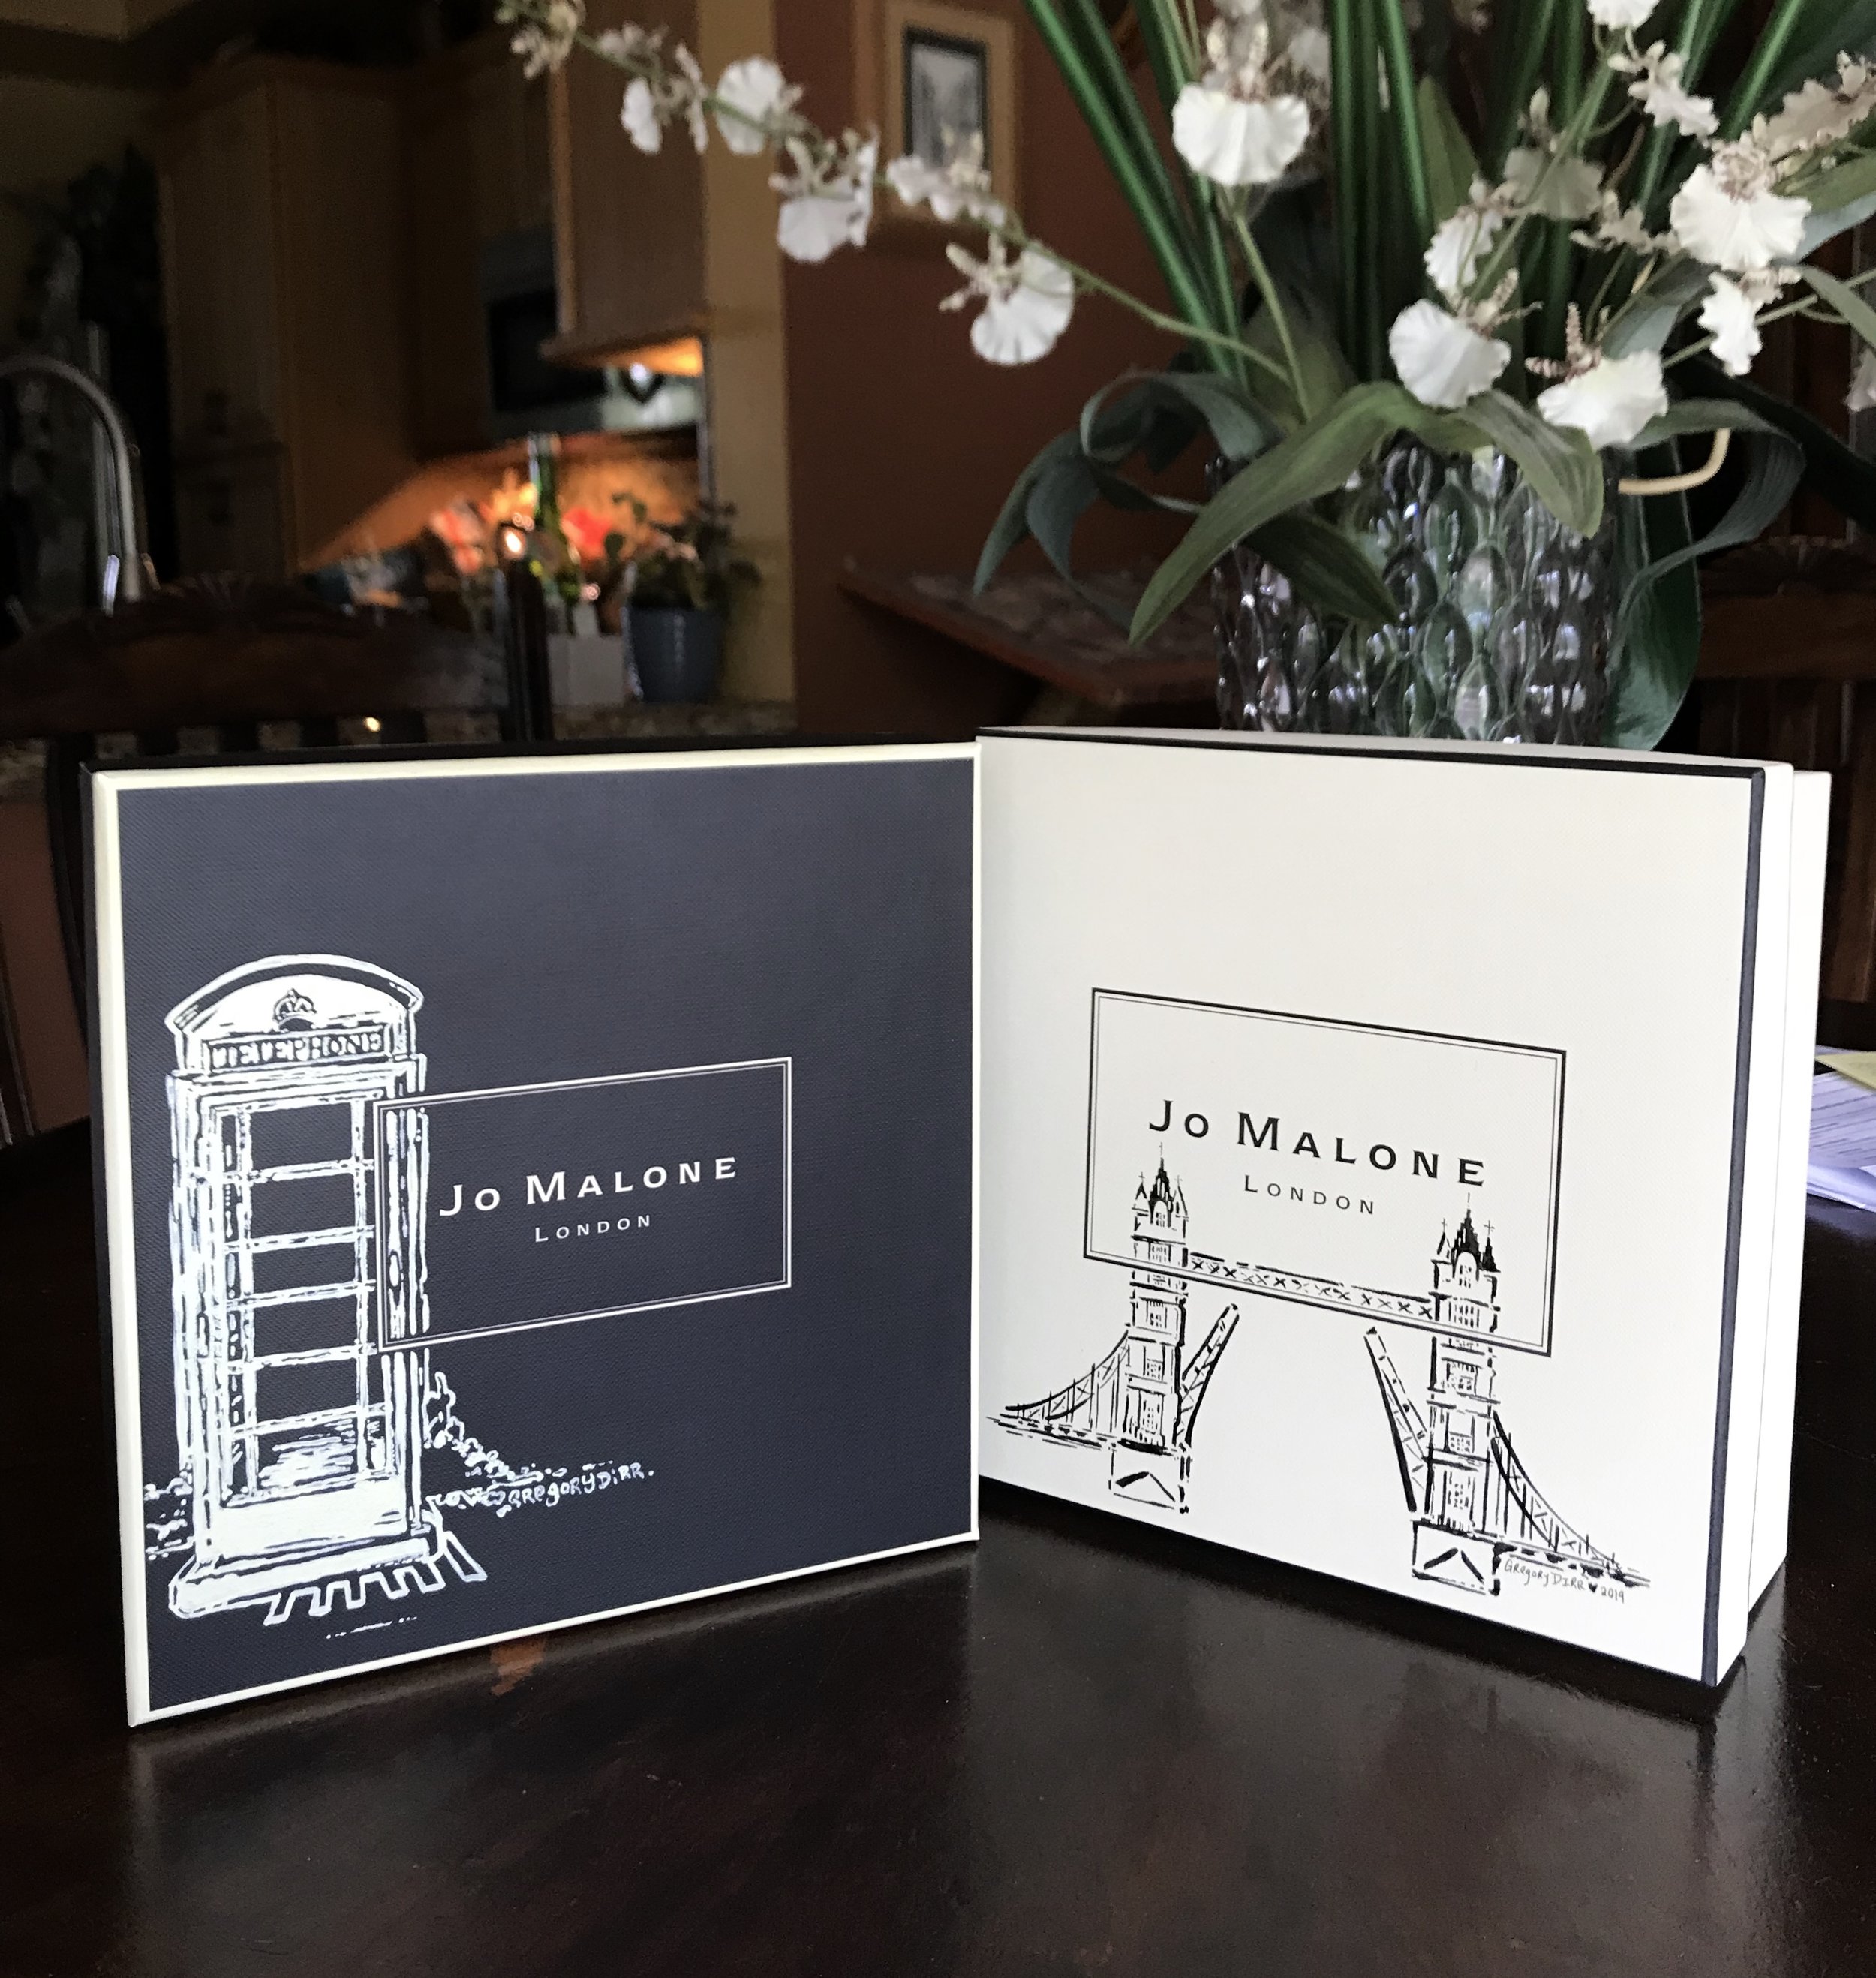   Jo Malone  acrylic, ink on paper boxes. 2019   commissioned by Jo Malone/Estée Lauder for in store live art  